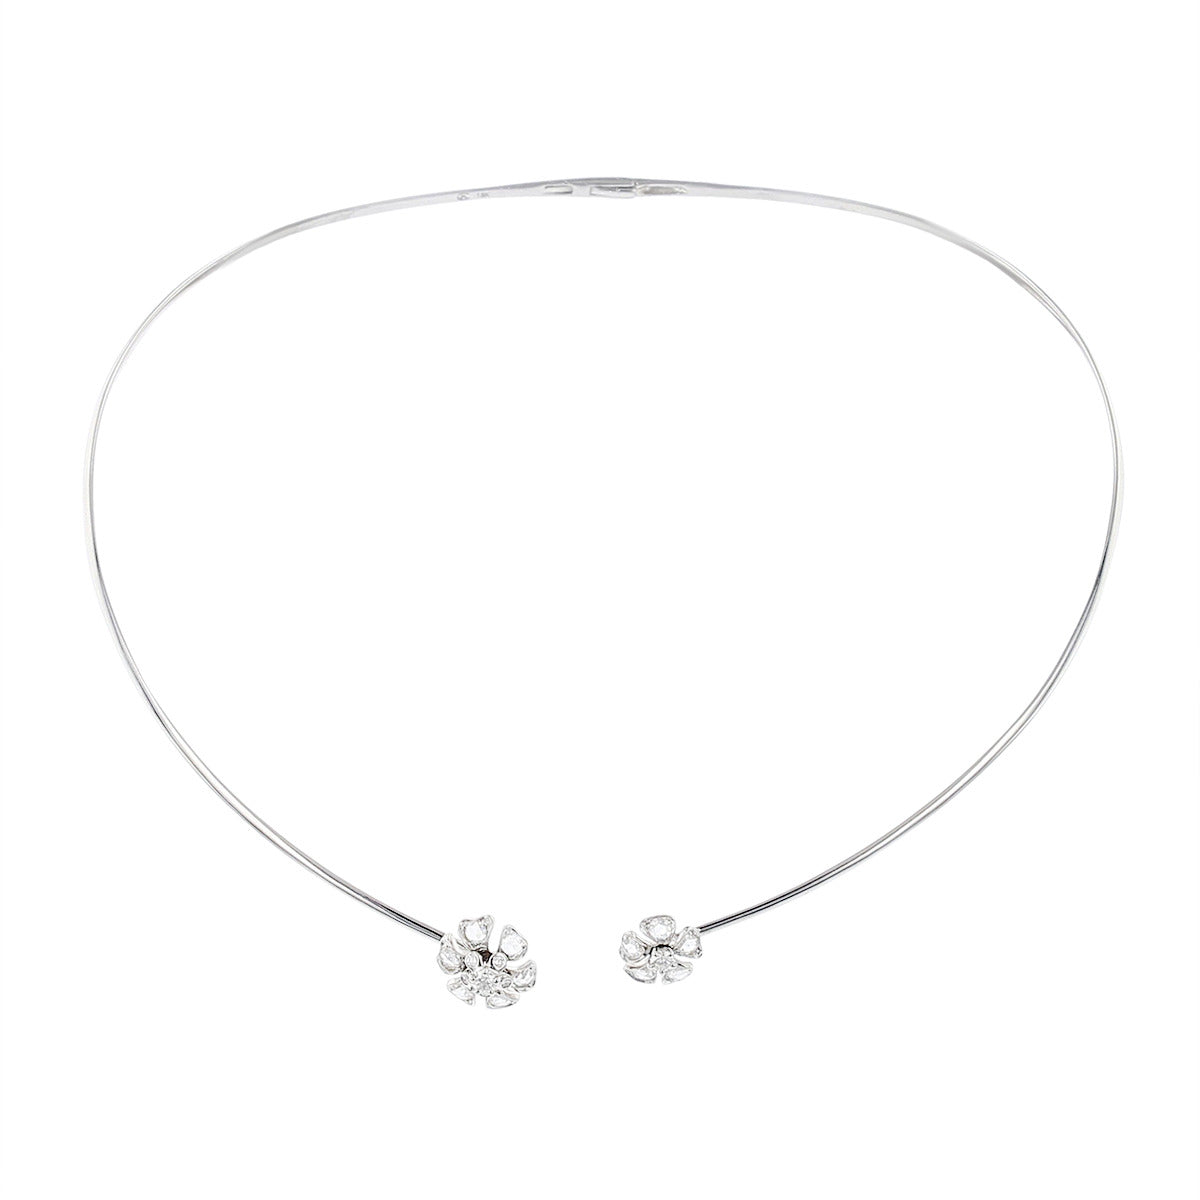 Maria Canale 18K White Gold Diamond Necklace